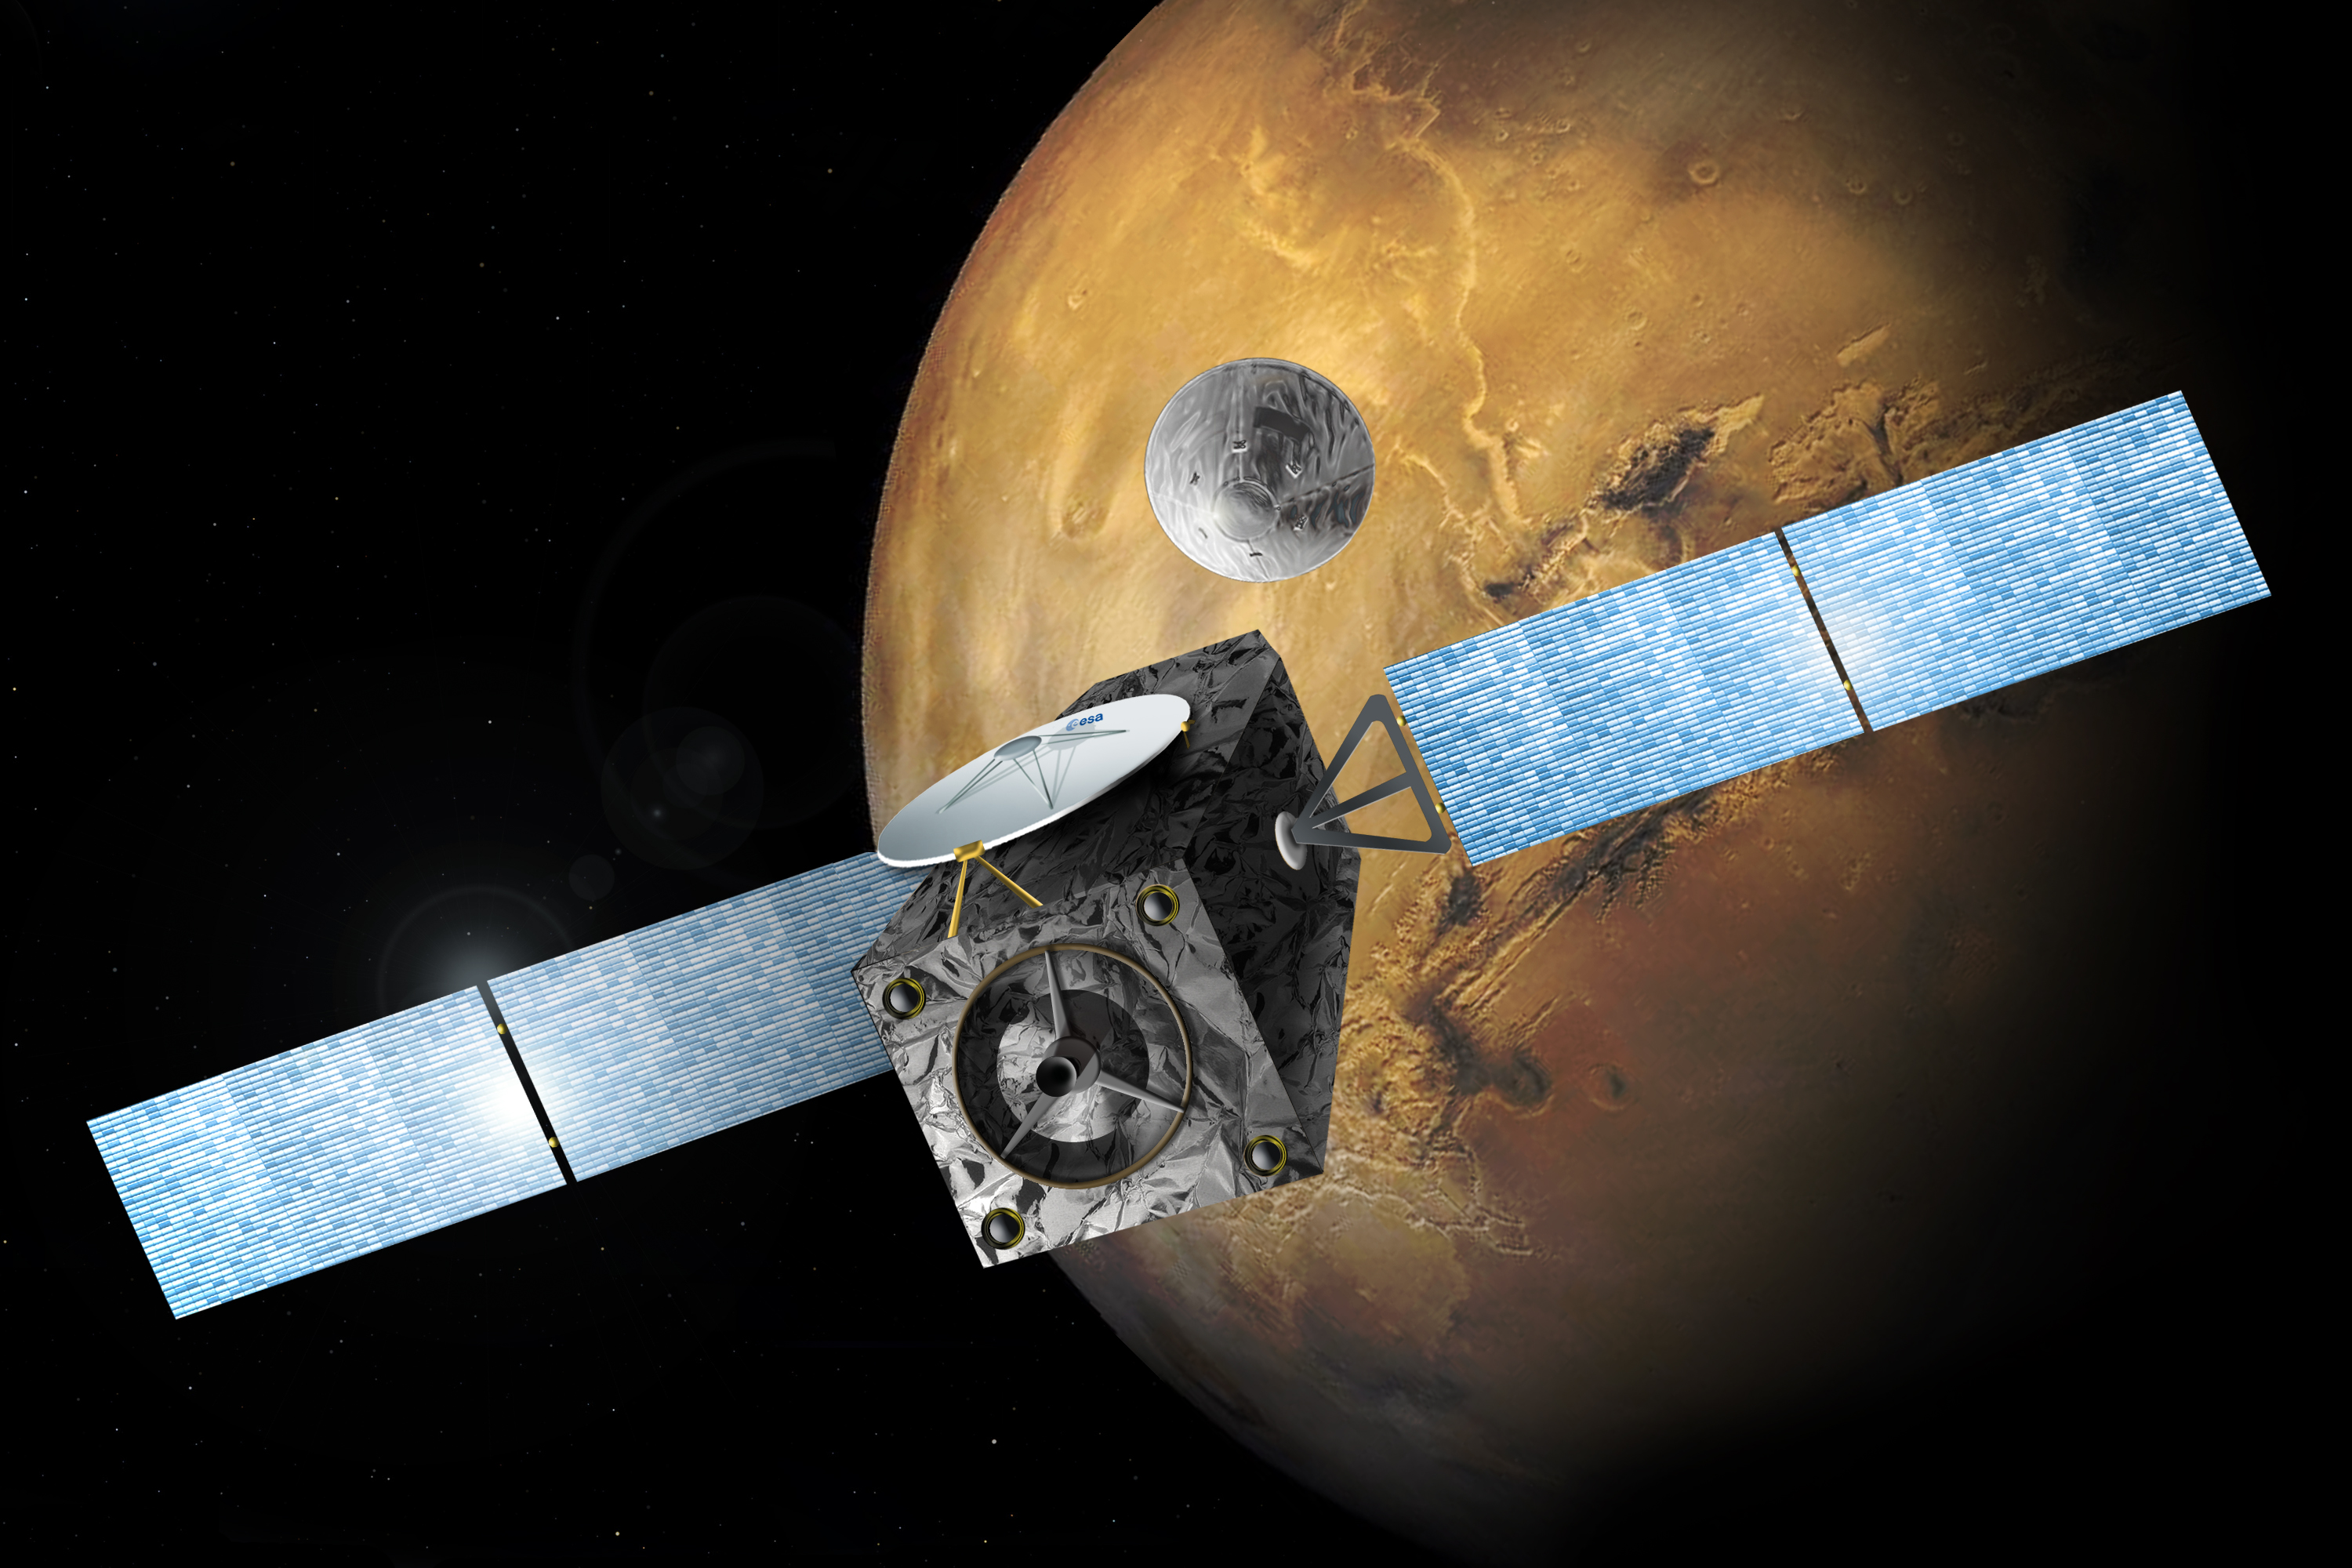 European-Russian Mission to Mars Launches Next Week